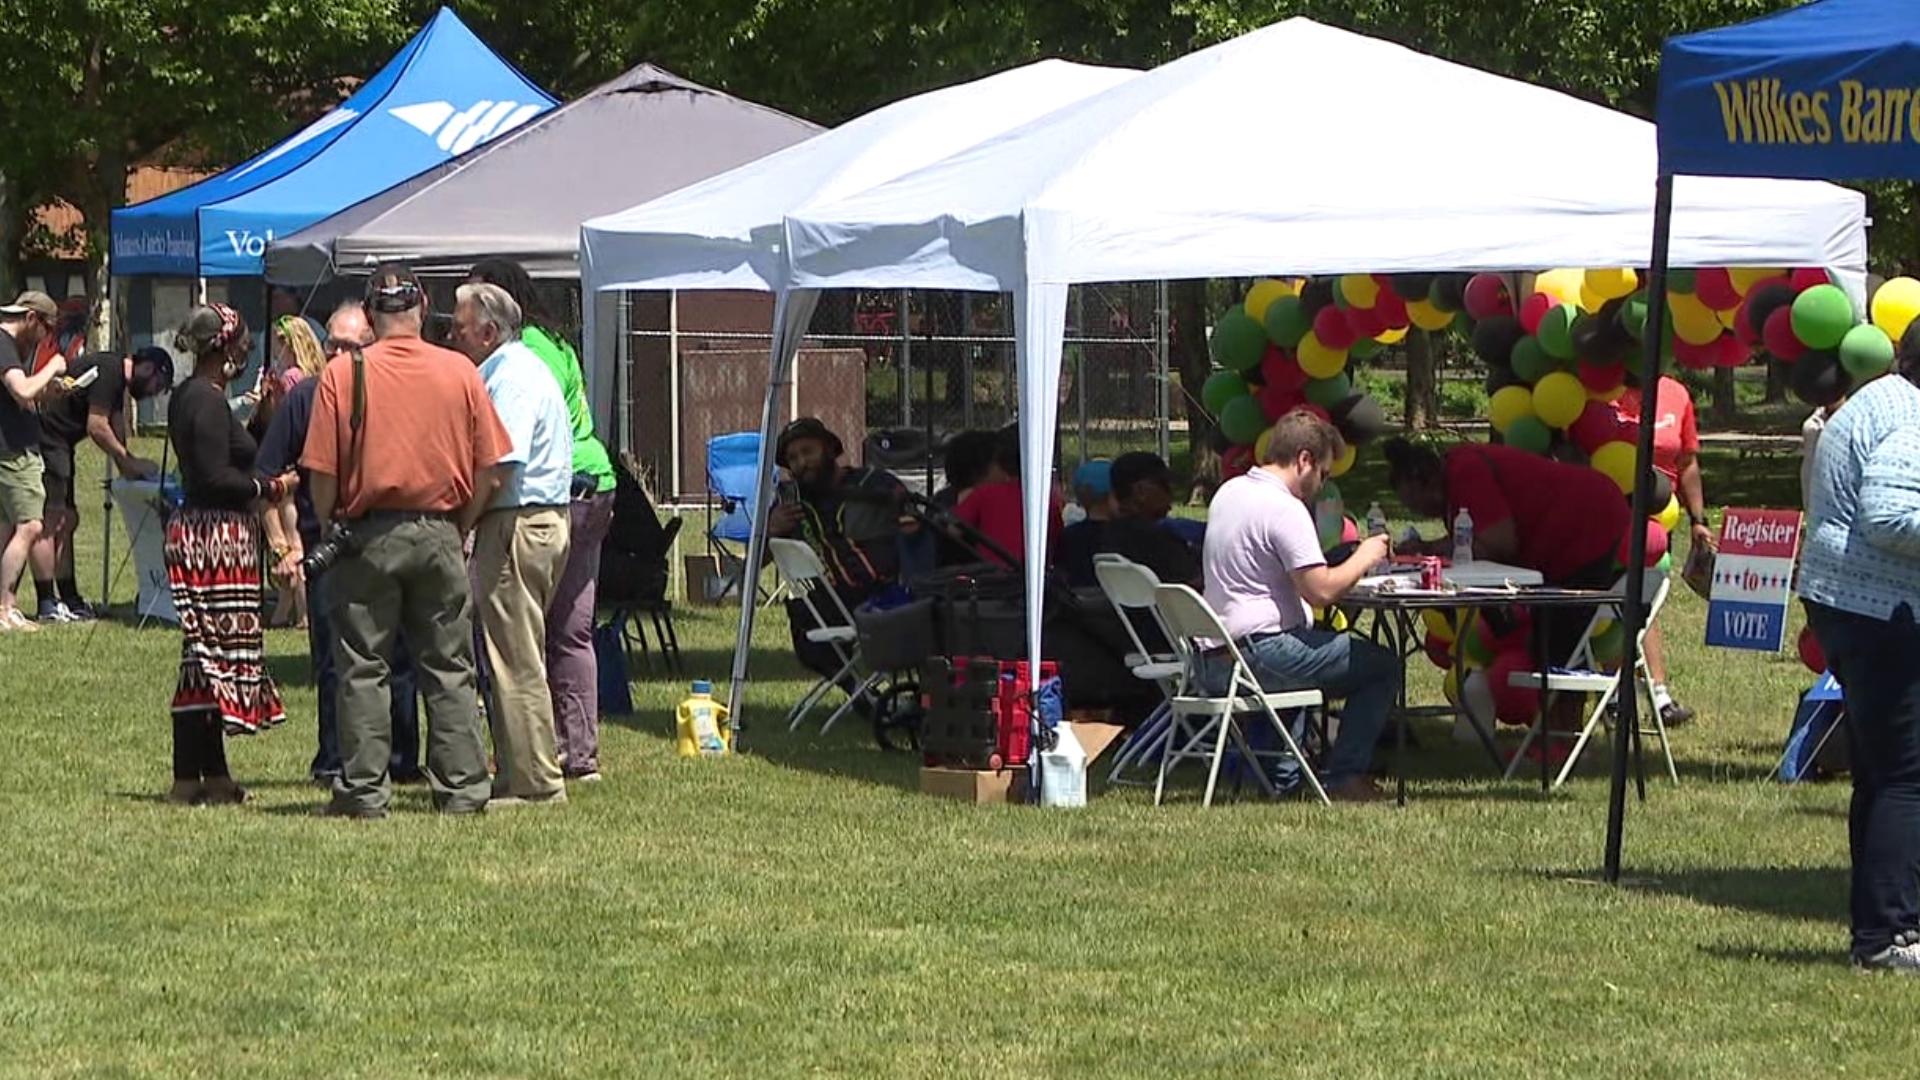 The Wilkes-Barre branch of the NAACP held its 3rd annual Juneteenth celebration Saturday at Martin Luther King Jr. Park along Coal Street in the city.